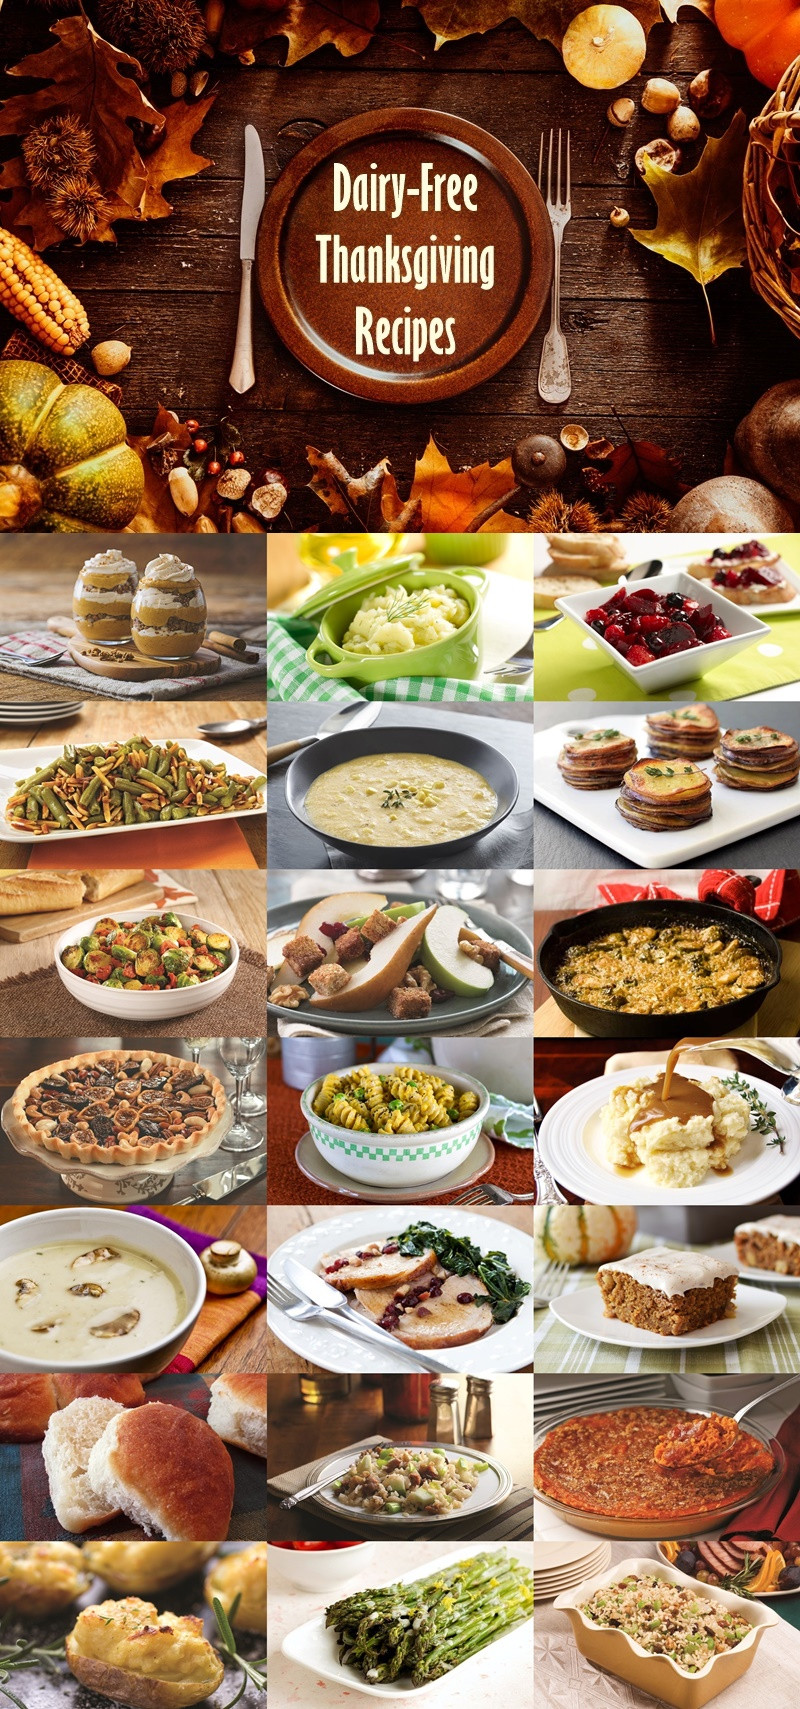 Polly'S Pies Thanksgiving Dinner To Go
 The Biggest Gathering of Dairy Free Thanksgiving Recipes